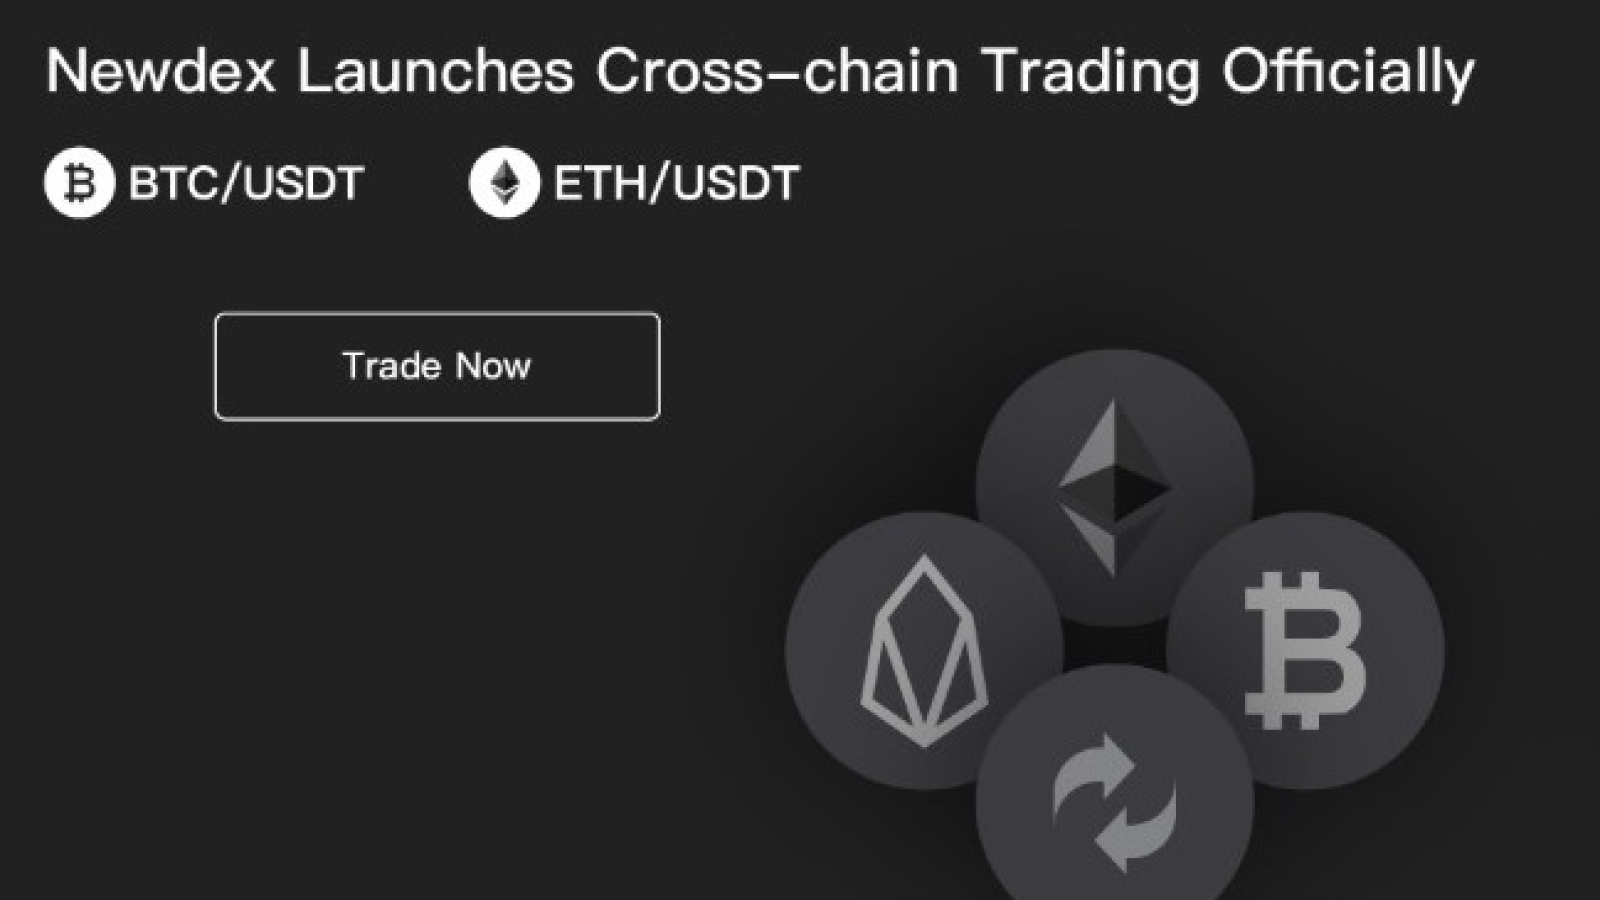 Newdex launches cross-chain trading officially